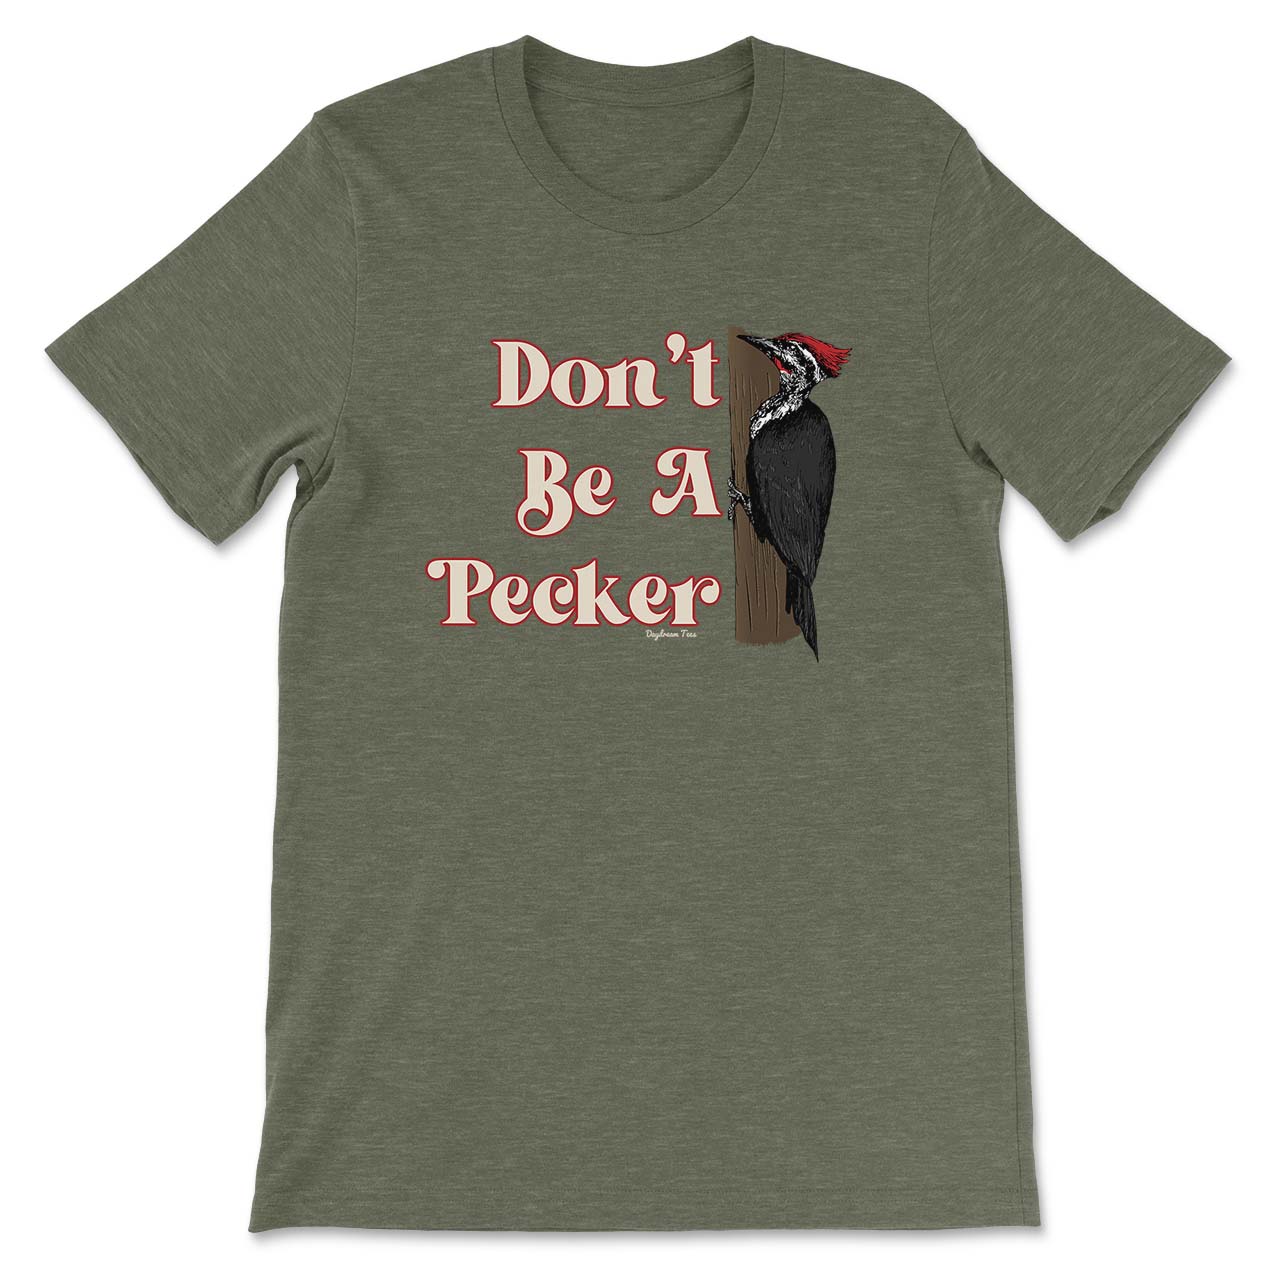 Daydream Tees Don't Be A Pecker